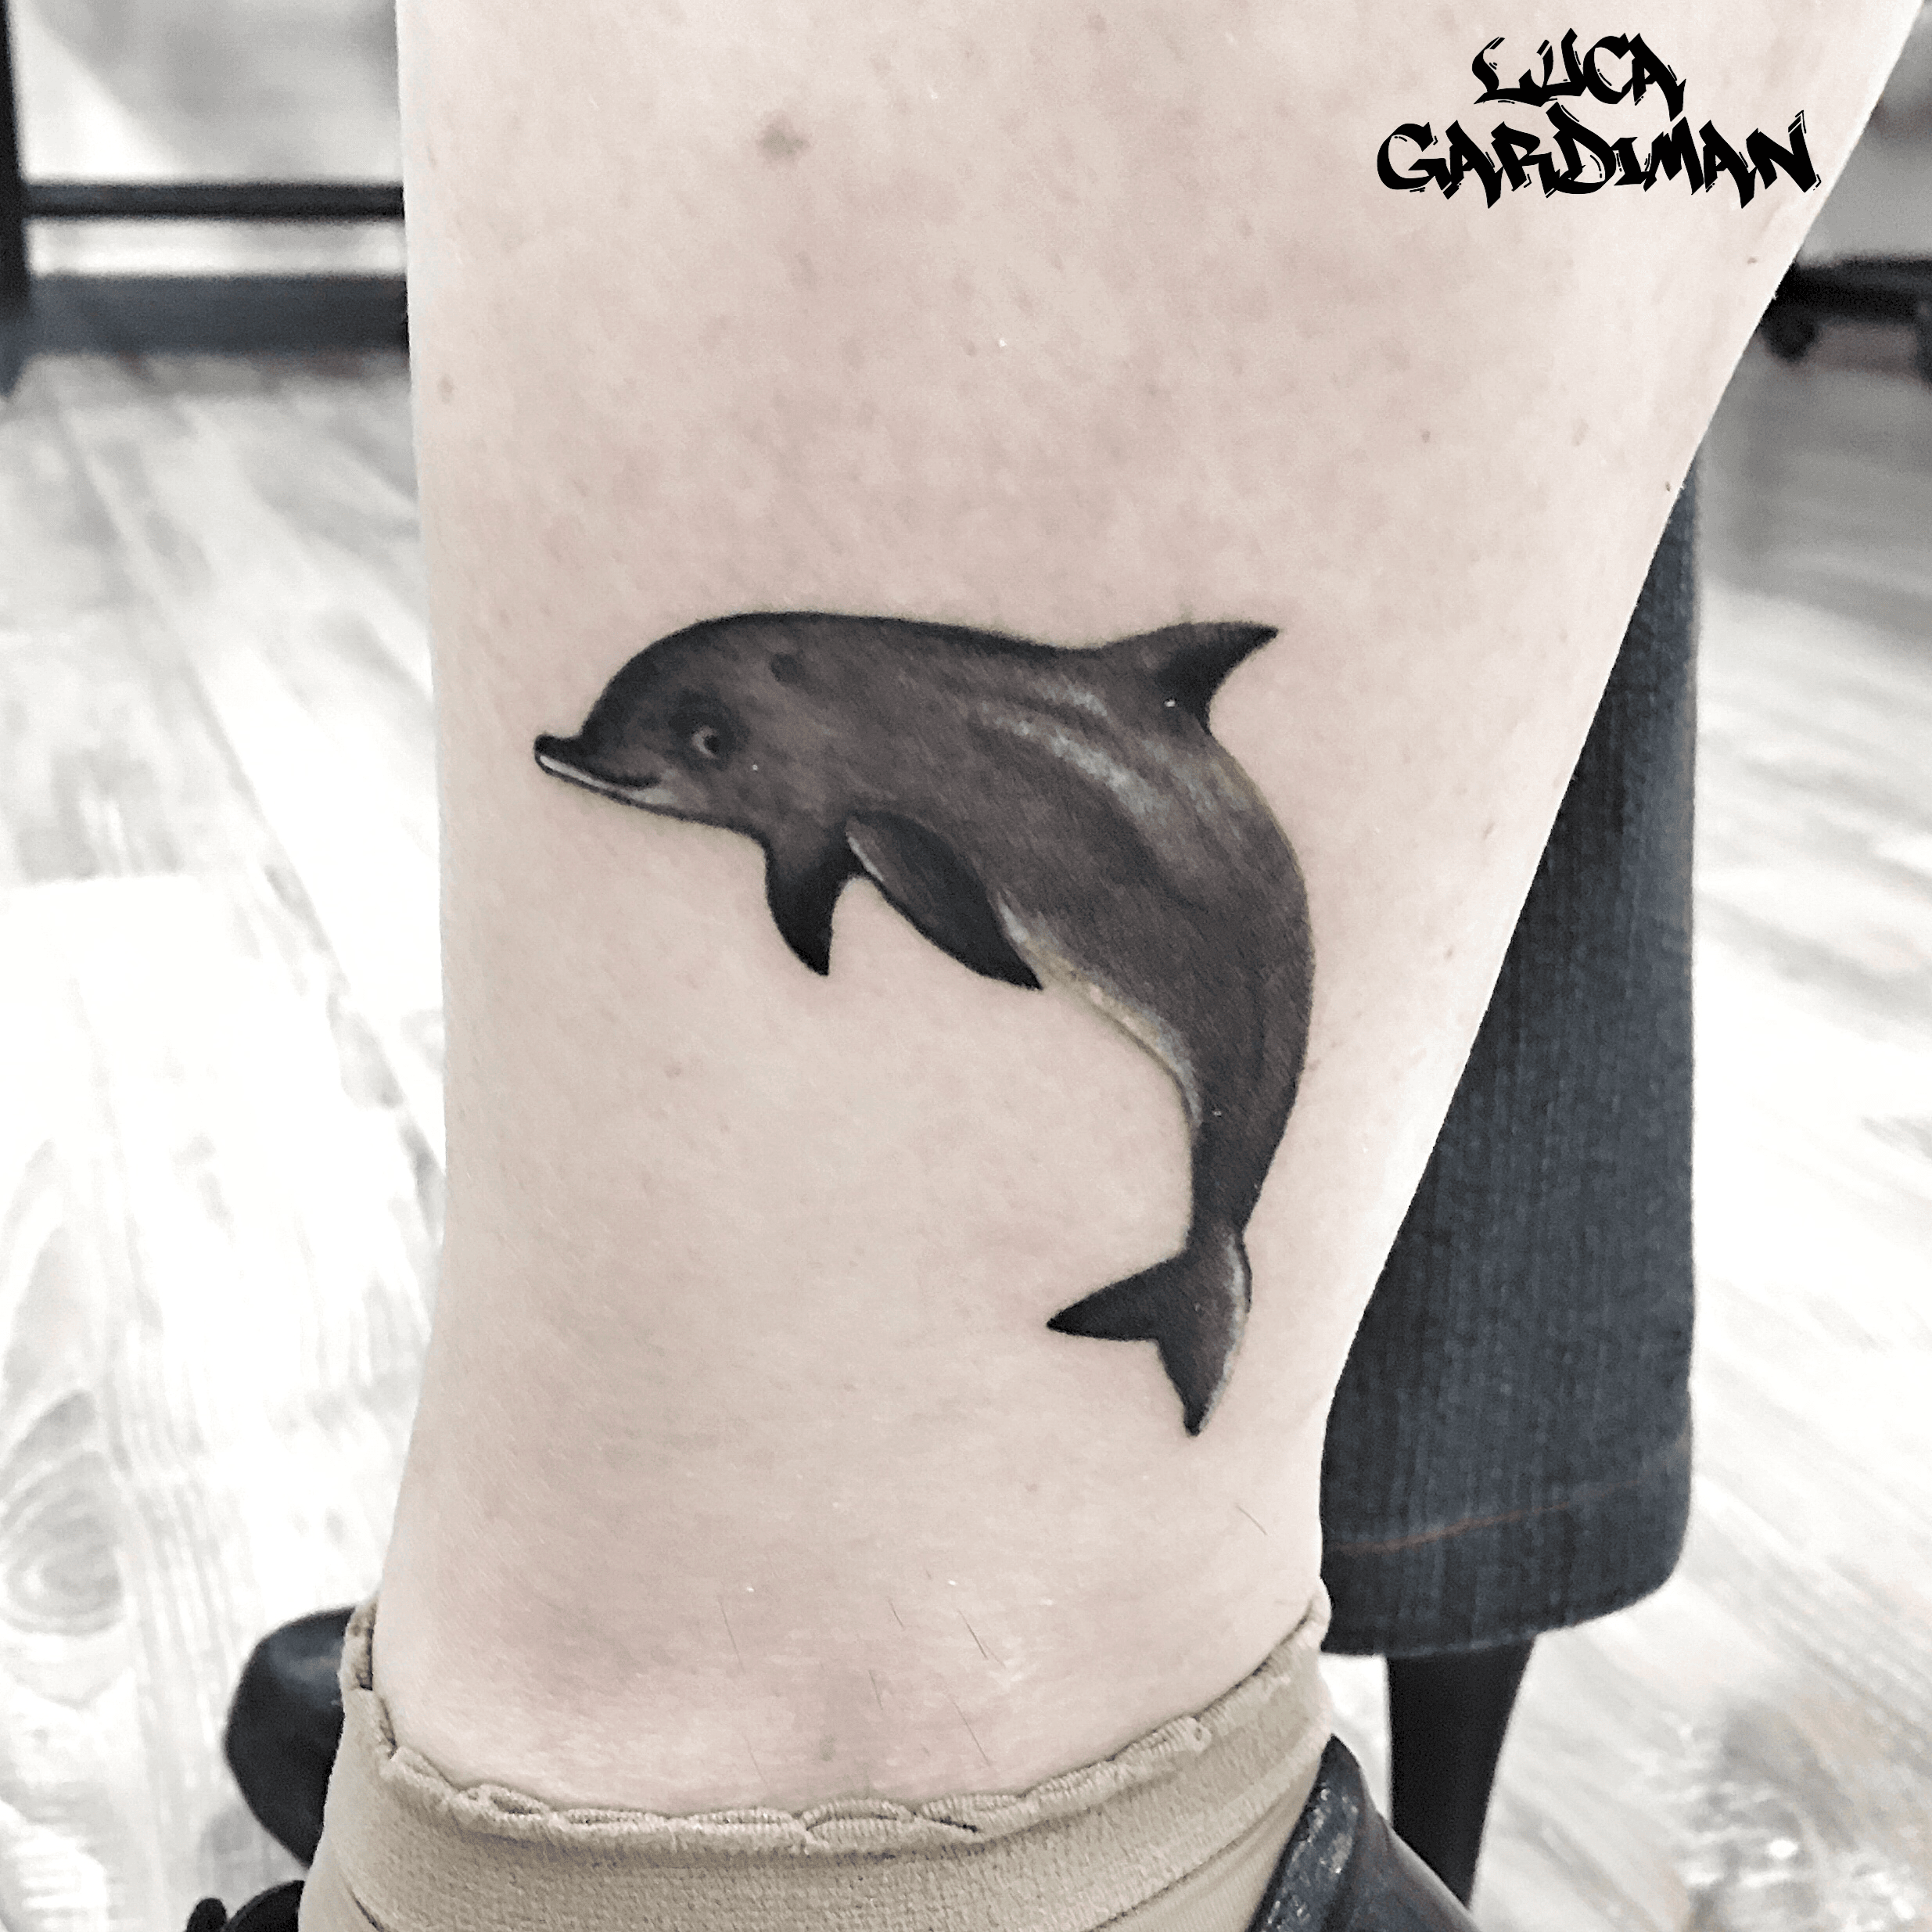 Dolphin Tattoo Meaning  What do Dolphin Tattoos Symbolize